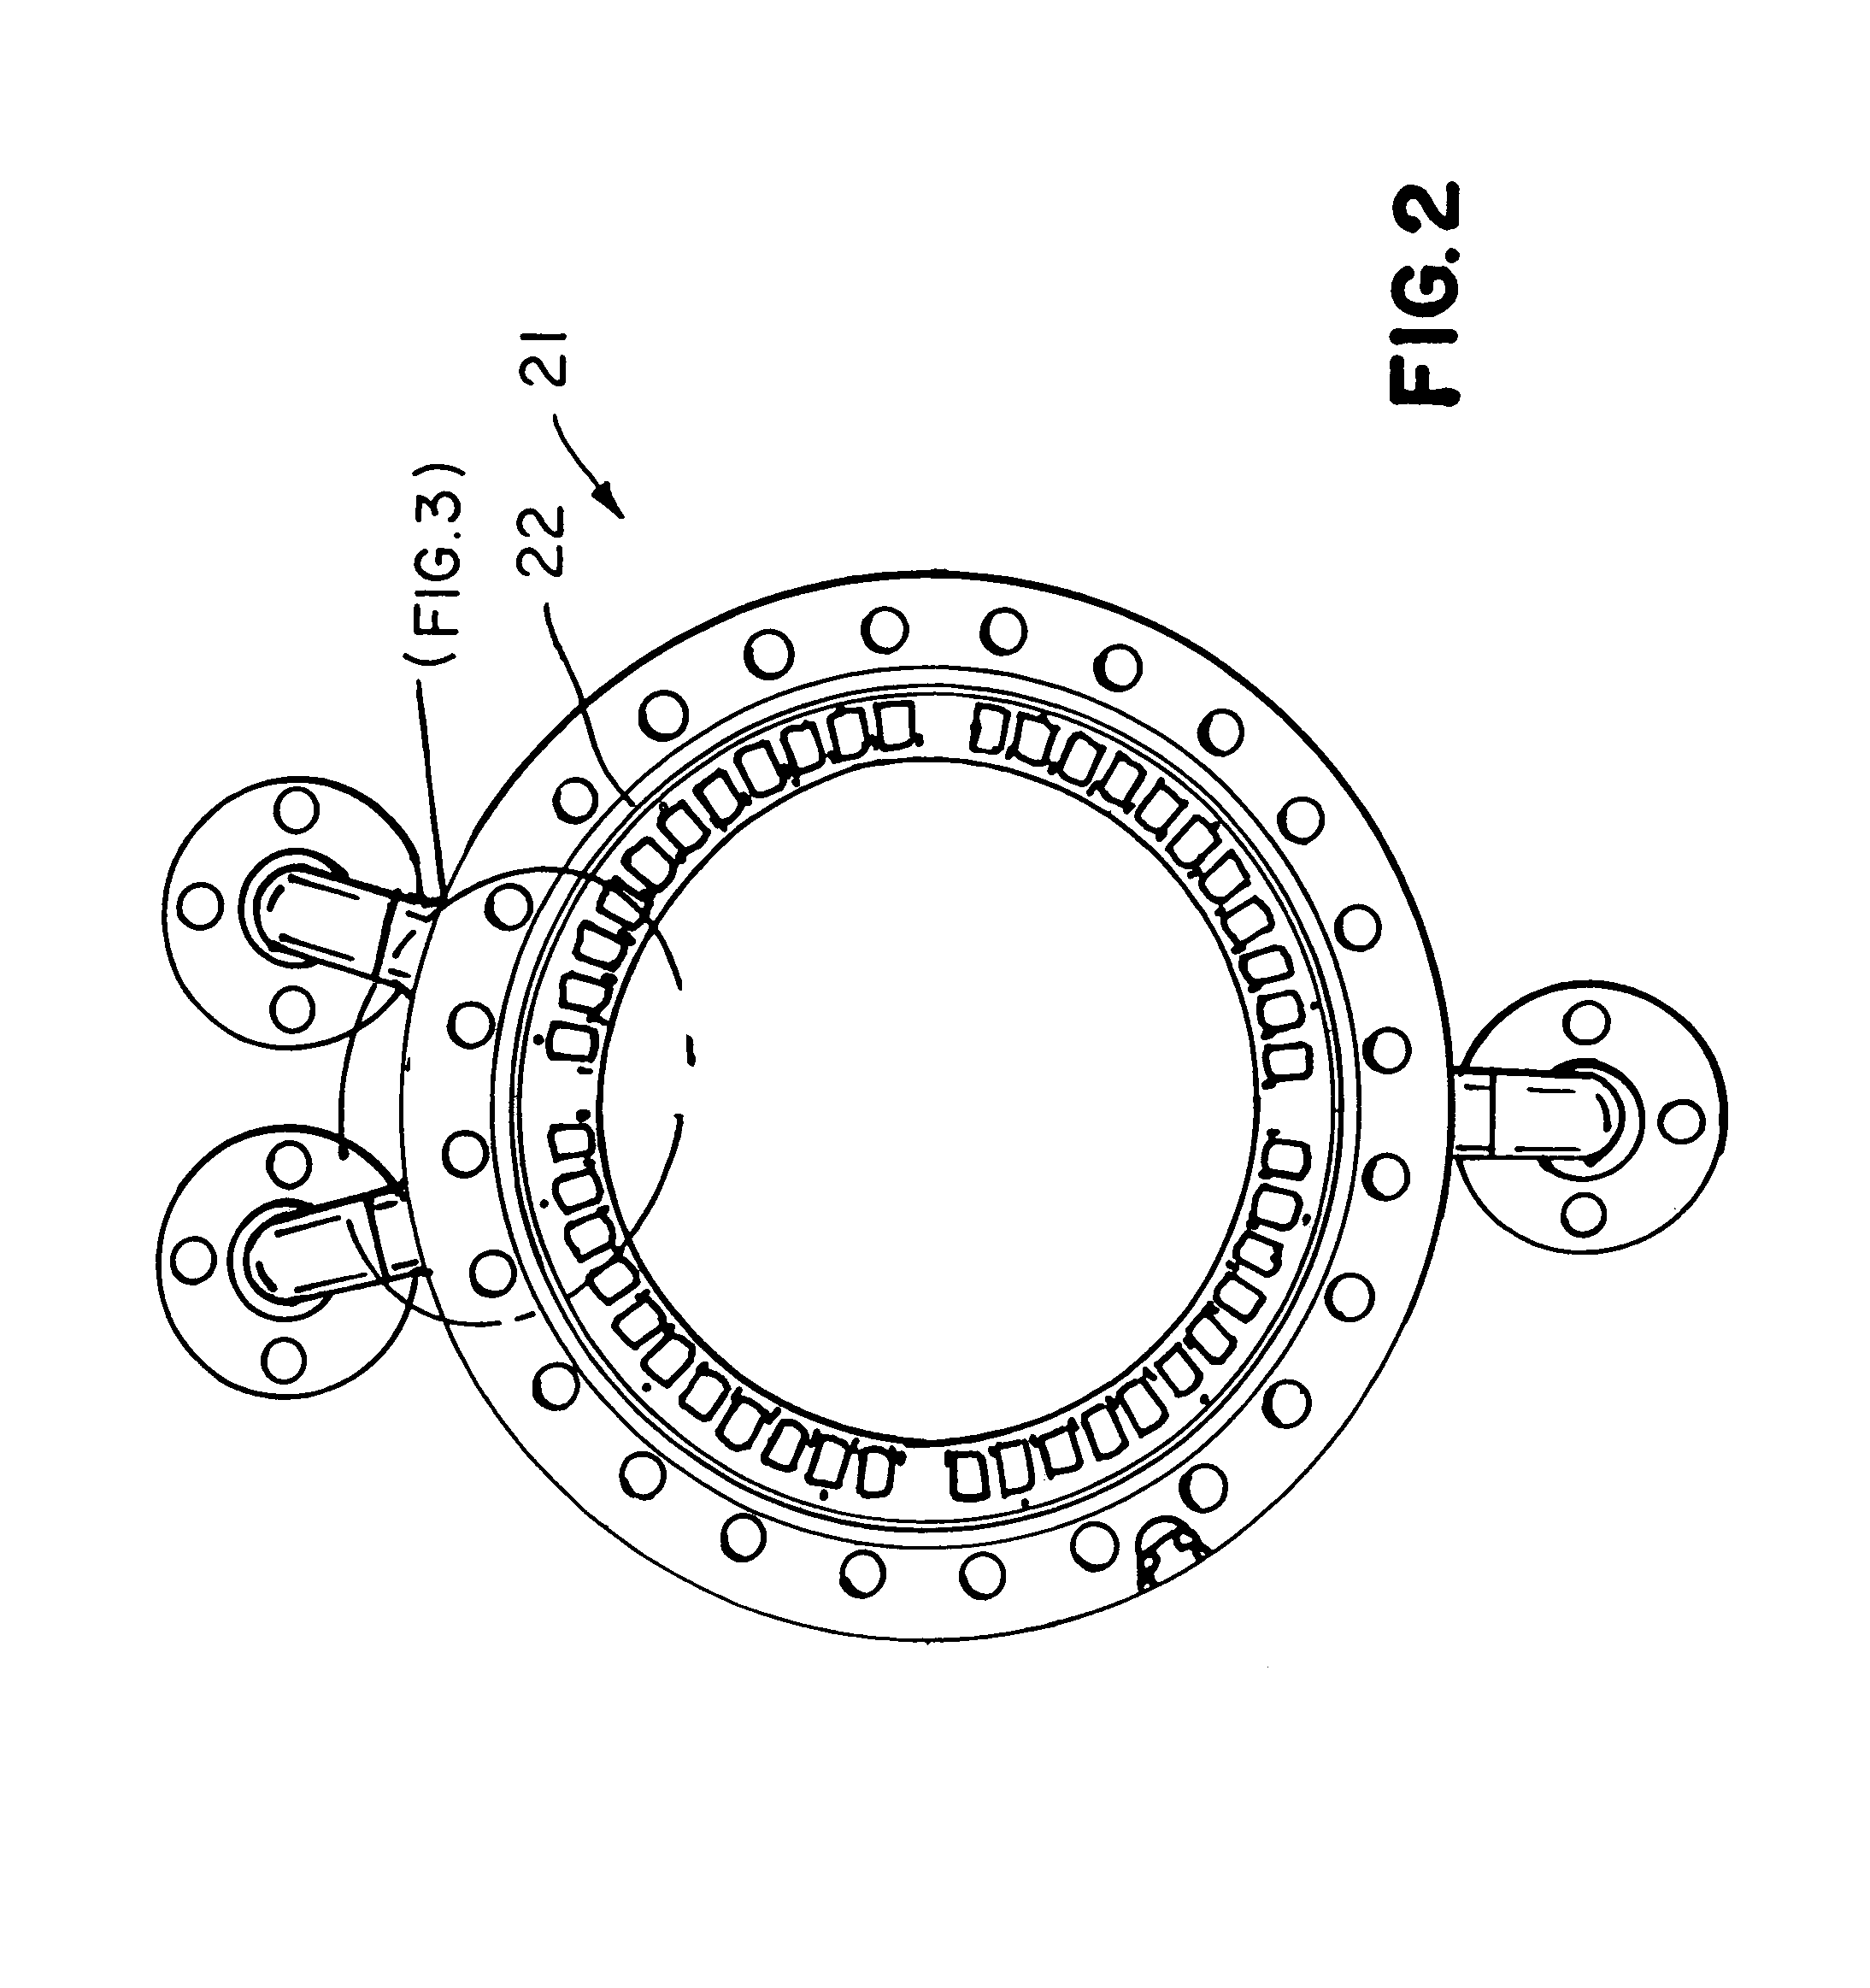 Method of operating a combustion system for increased turndown capability